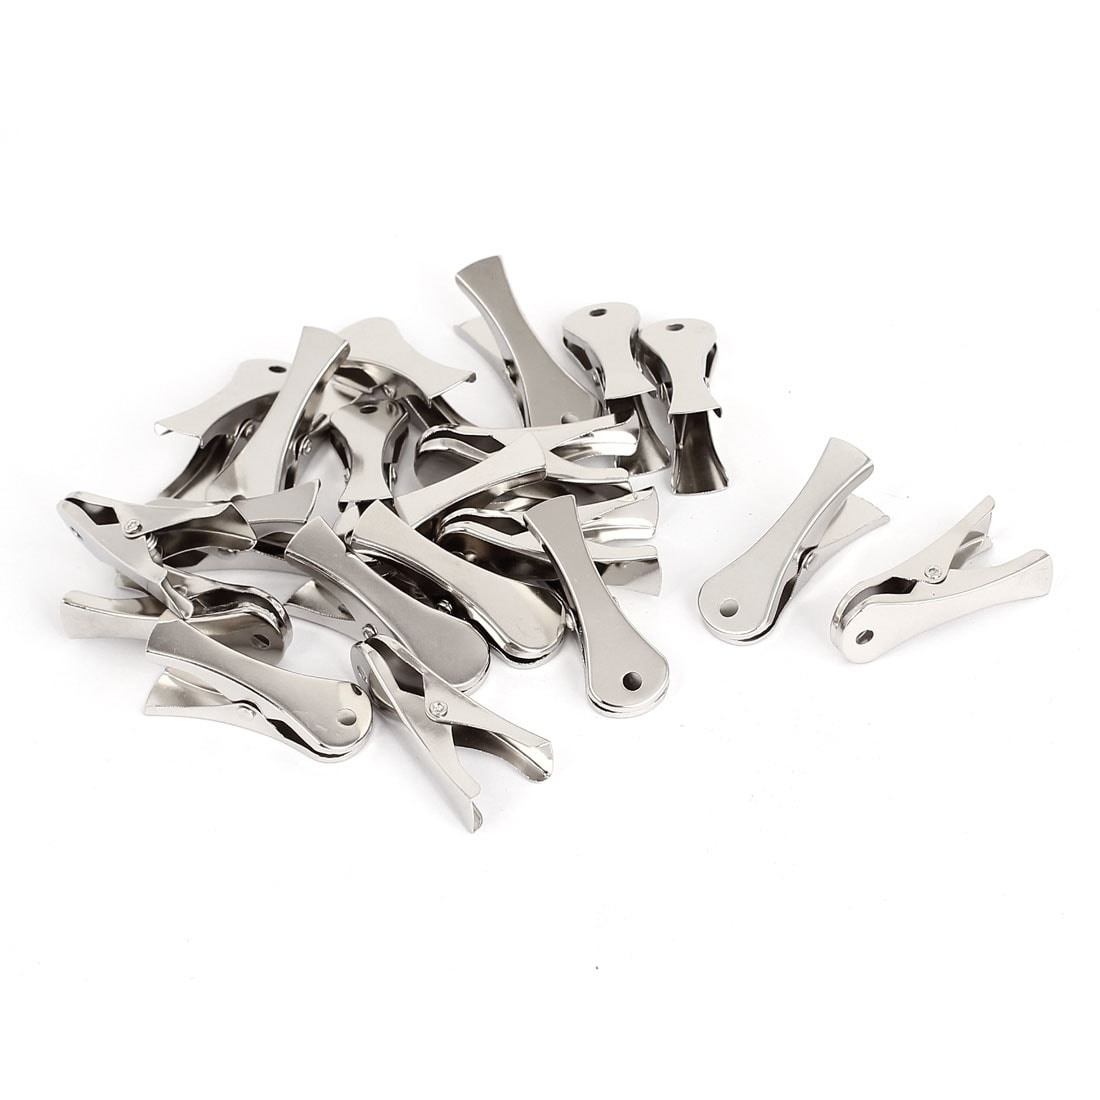 20PCS Stainless Steel Cloth Clip Metal Antislip Spring Loaded